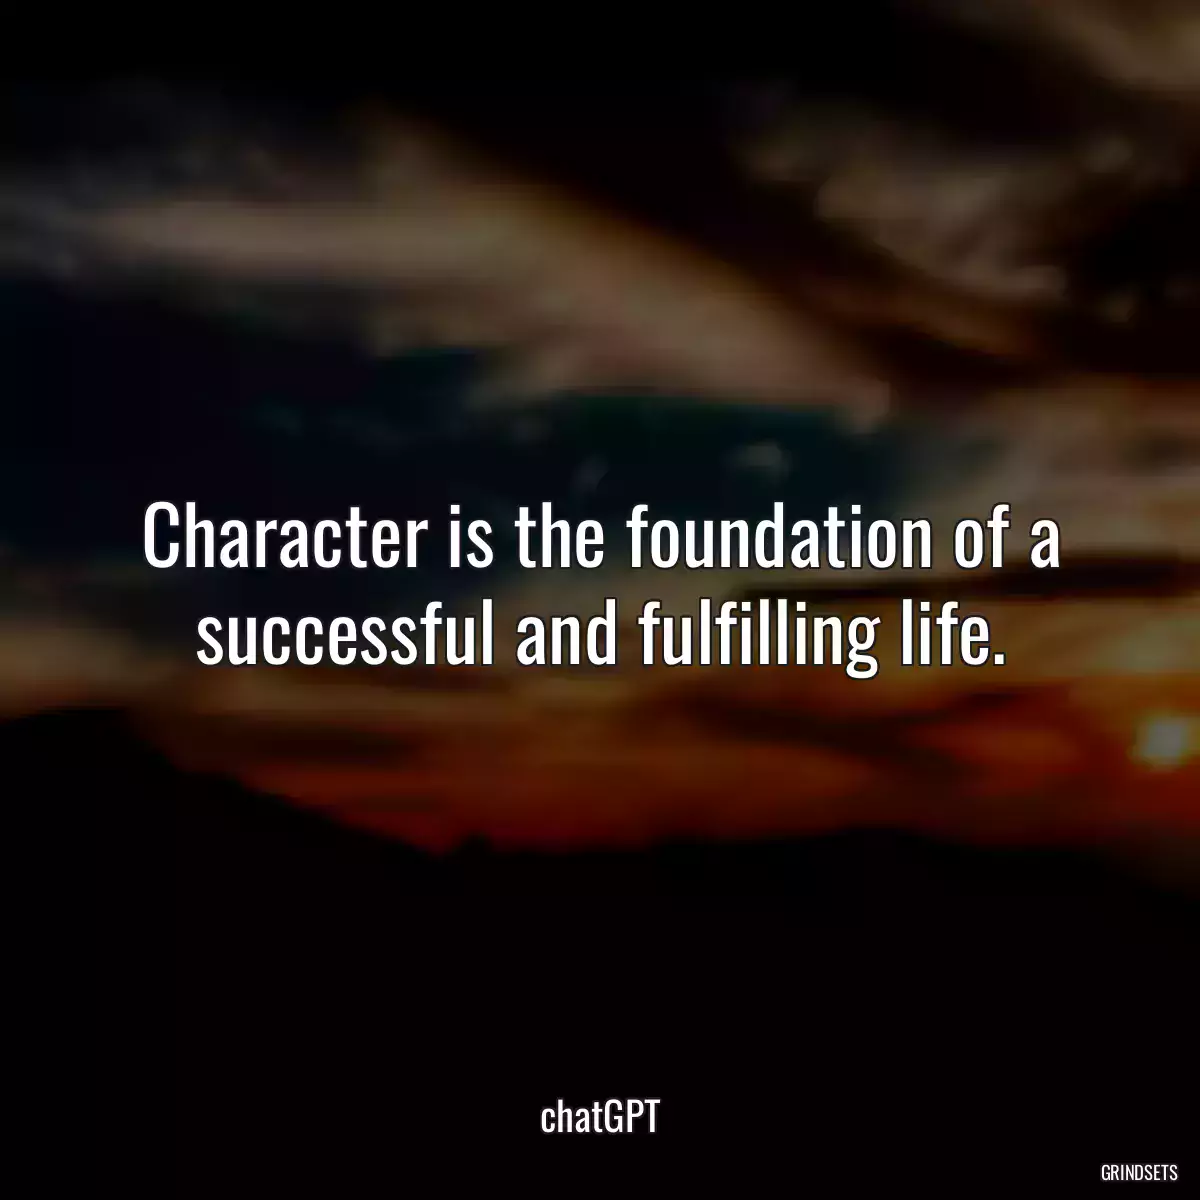 Character is the foundation of a successful and fulfilling life.